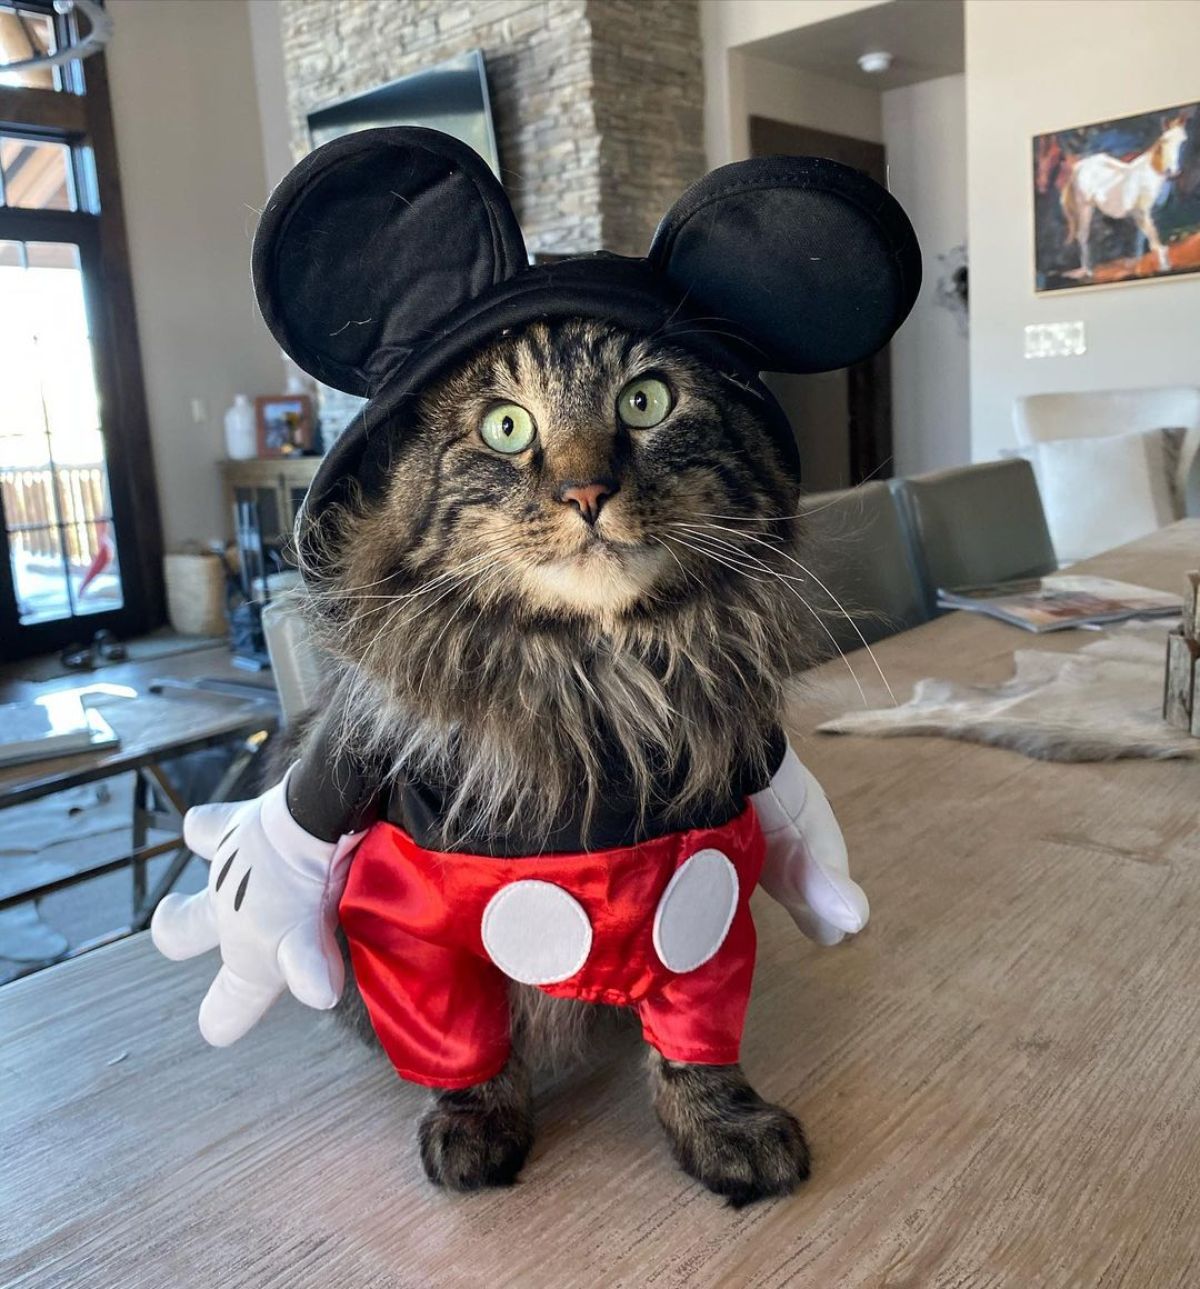 Otie the Maine Coon wearing an adorable halloween costume.